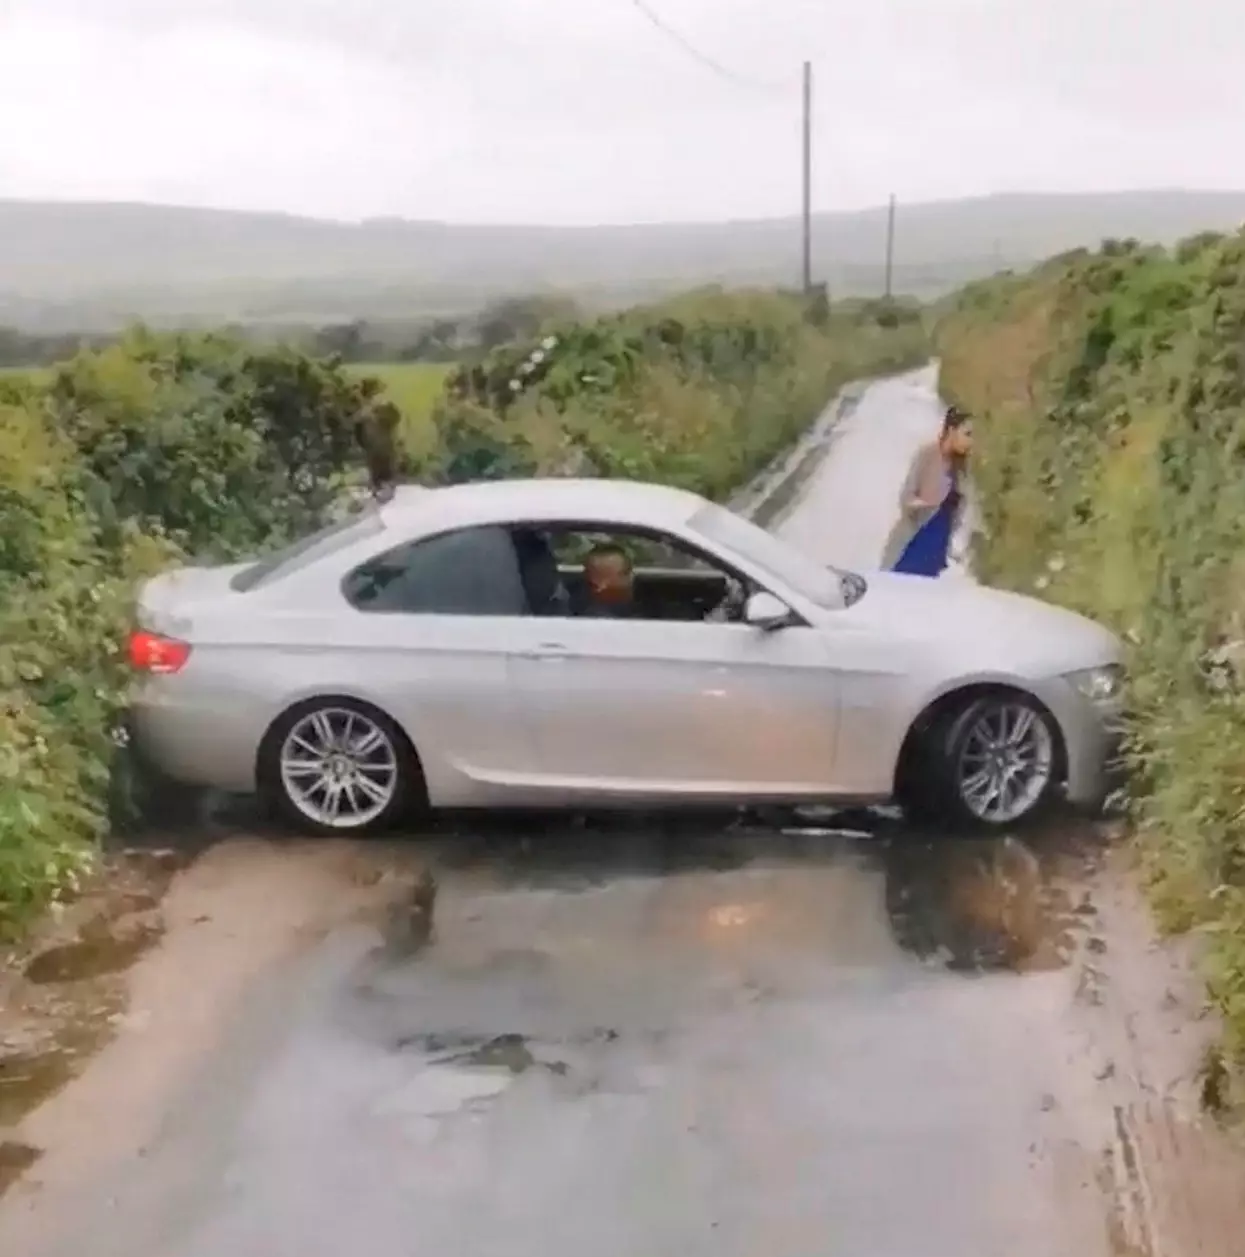 The car got stuck on a country lane in Cornwall.